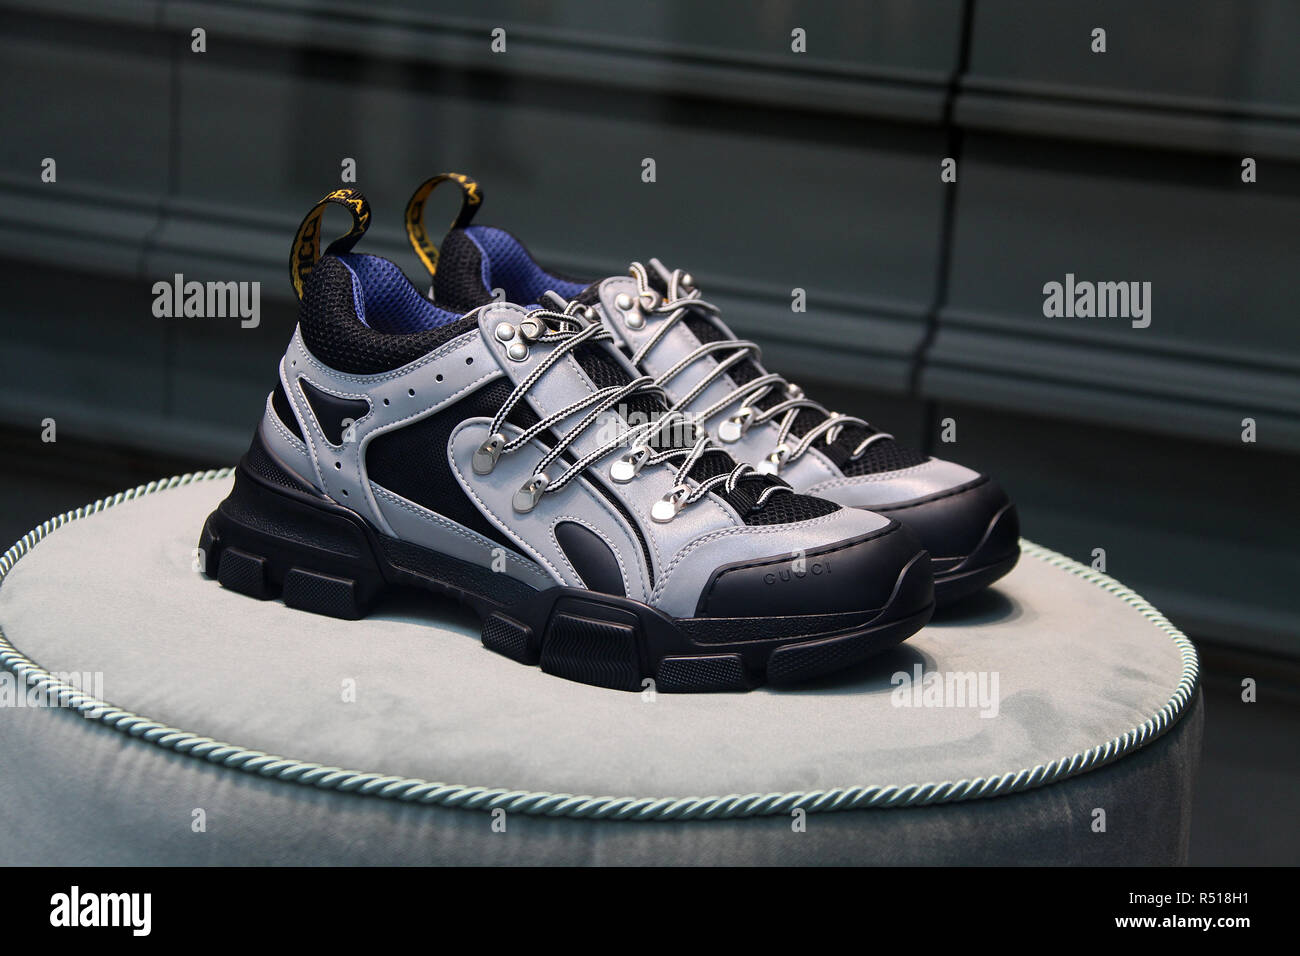 Trainers Shop Window High Resolution Stock Photography and Images - Alamy